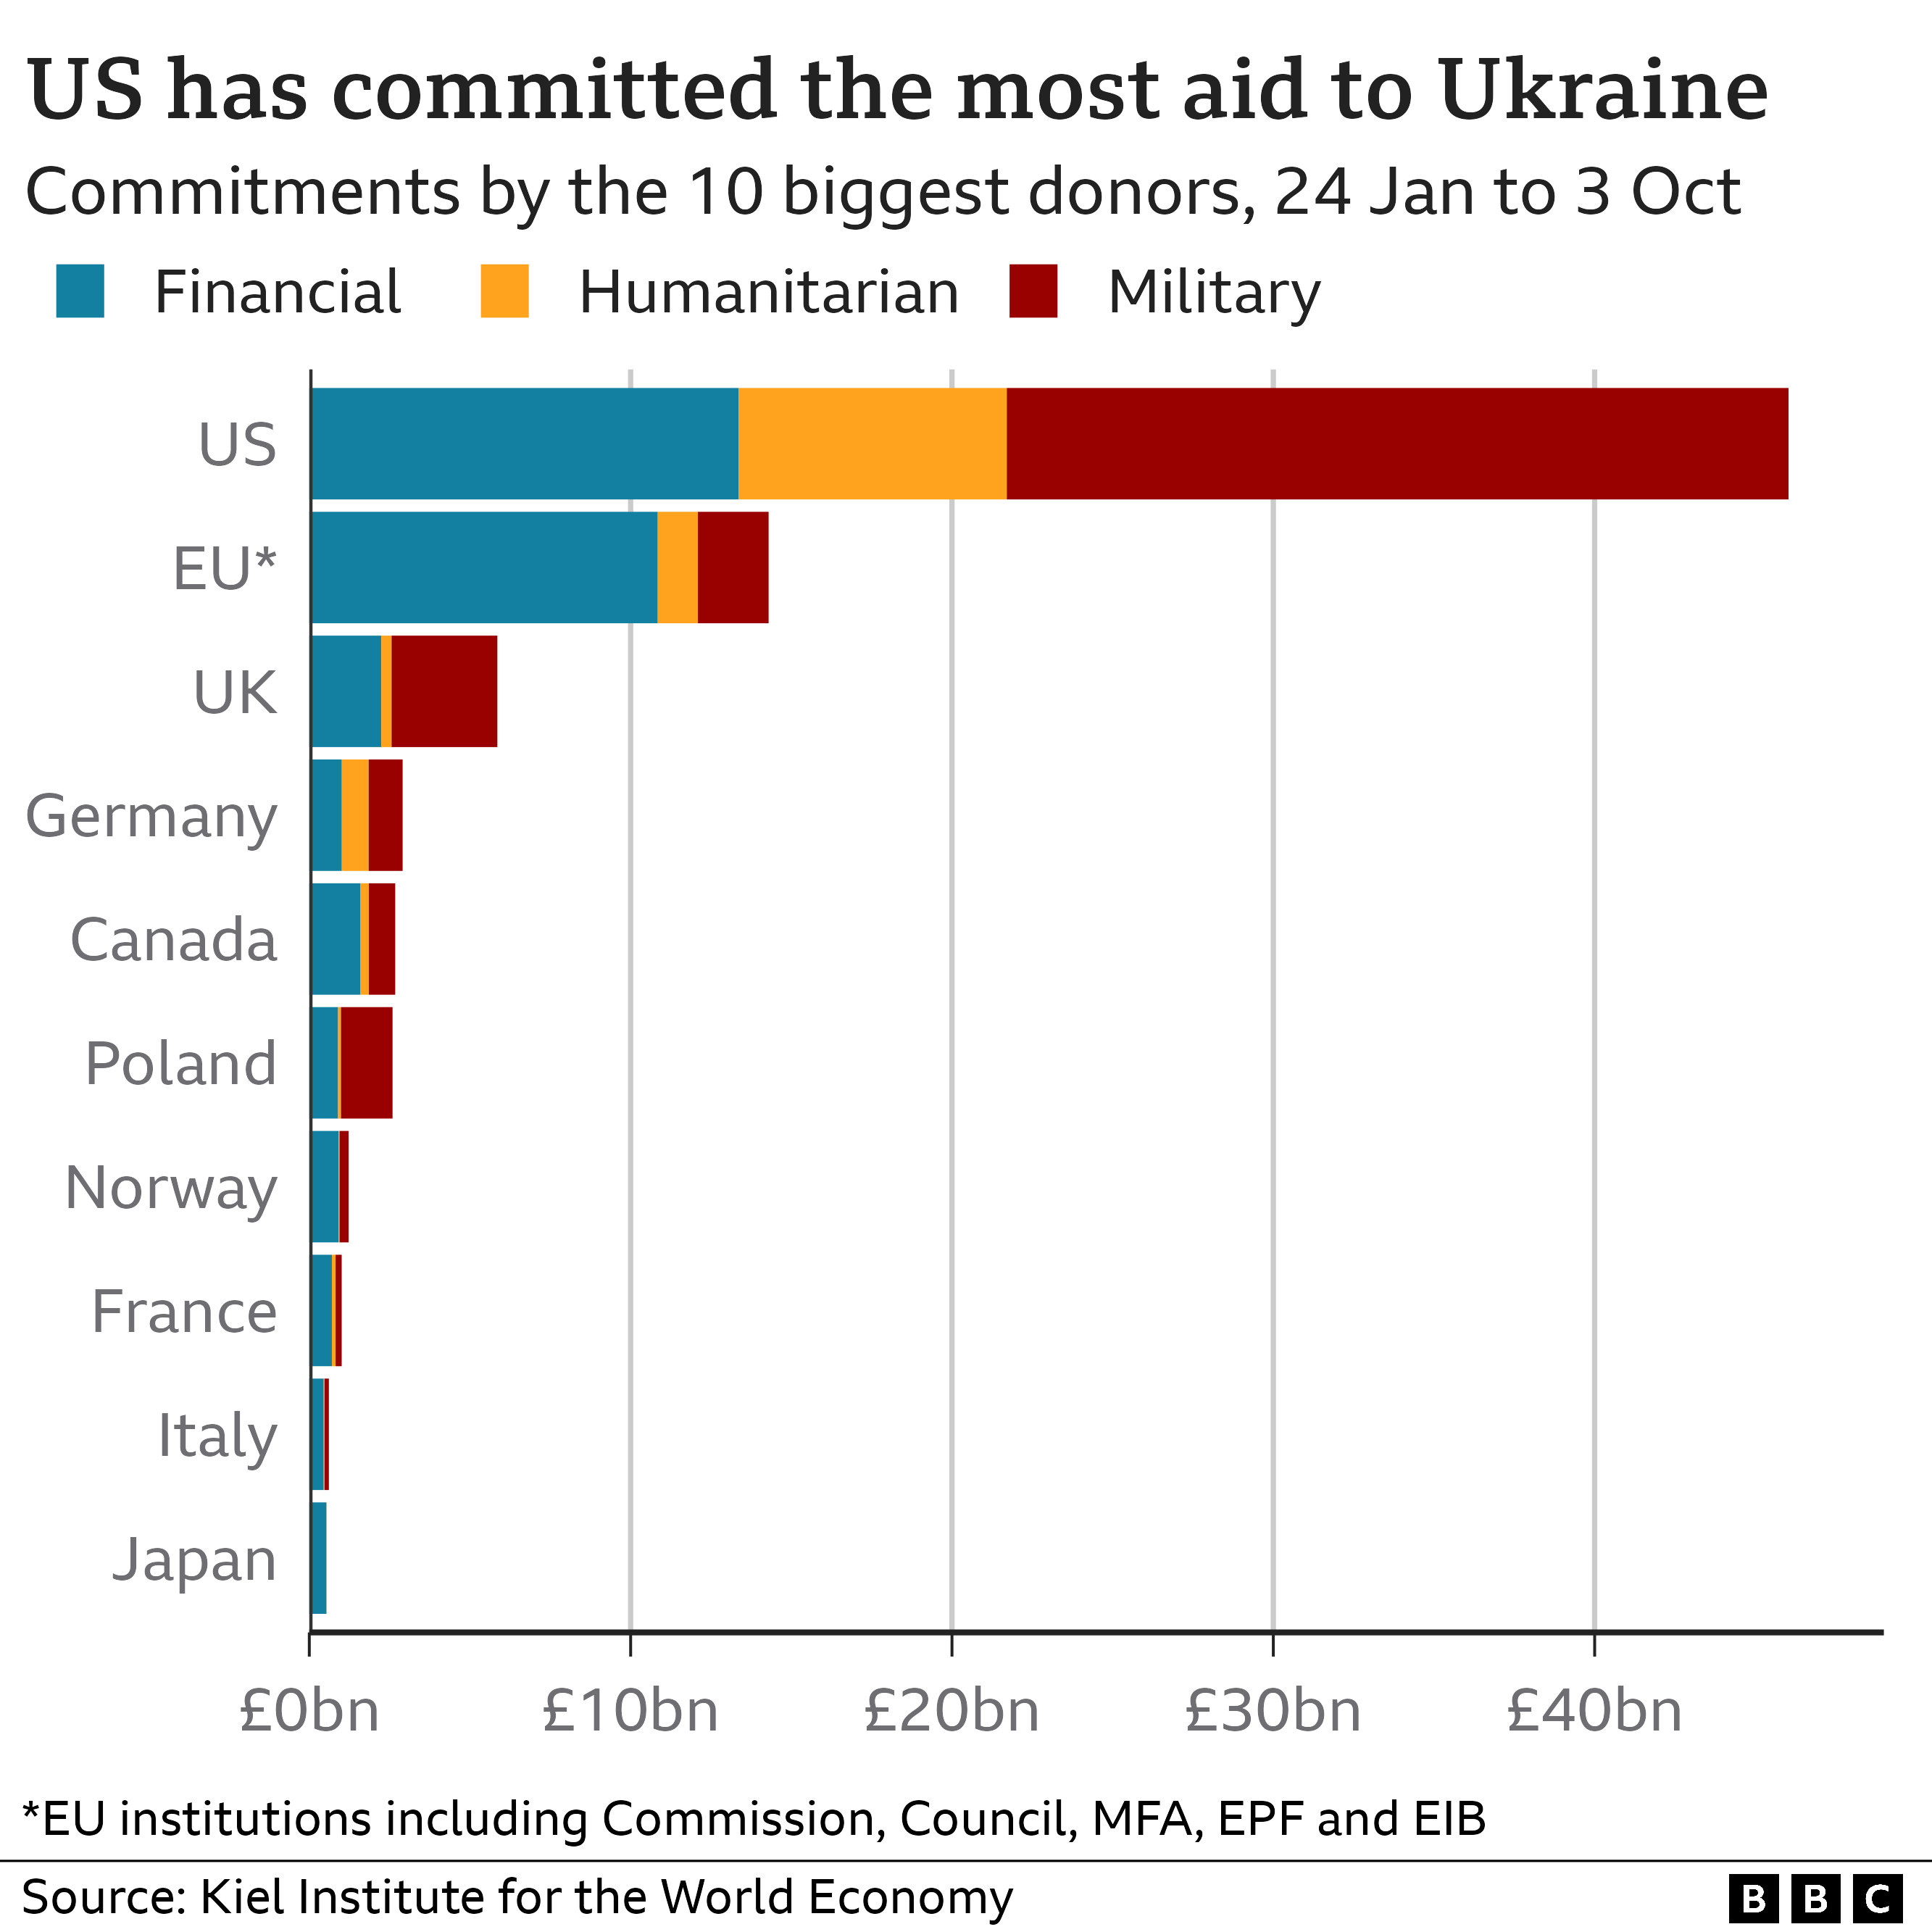 Chart showing which donors have contributed the most aid to Ukraine since late-January 2022